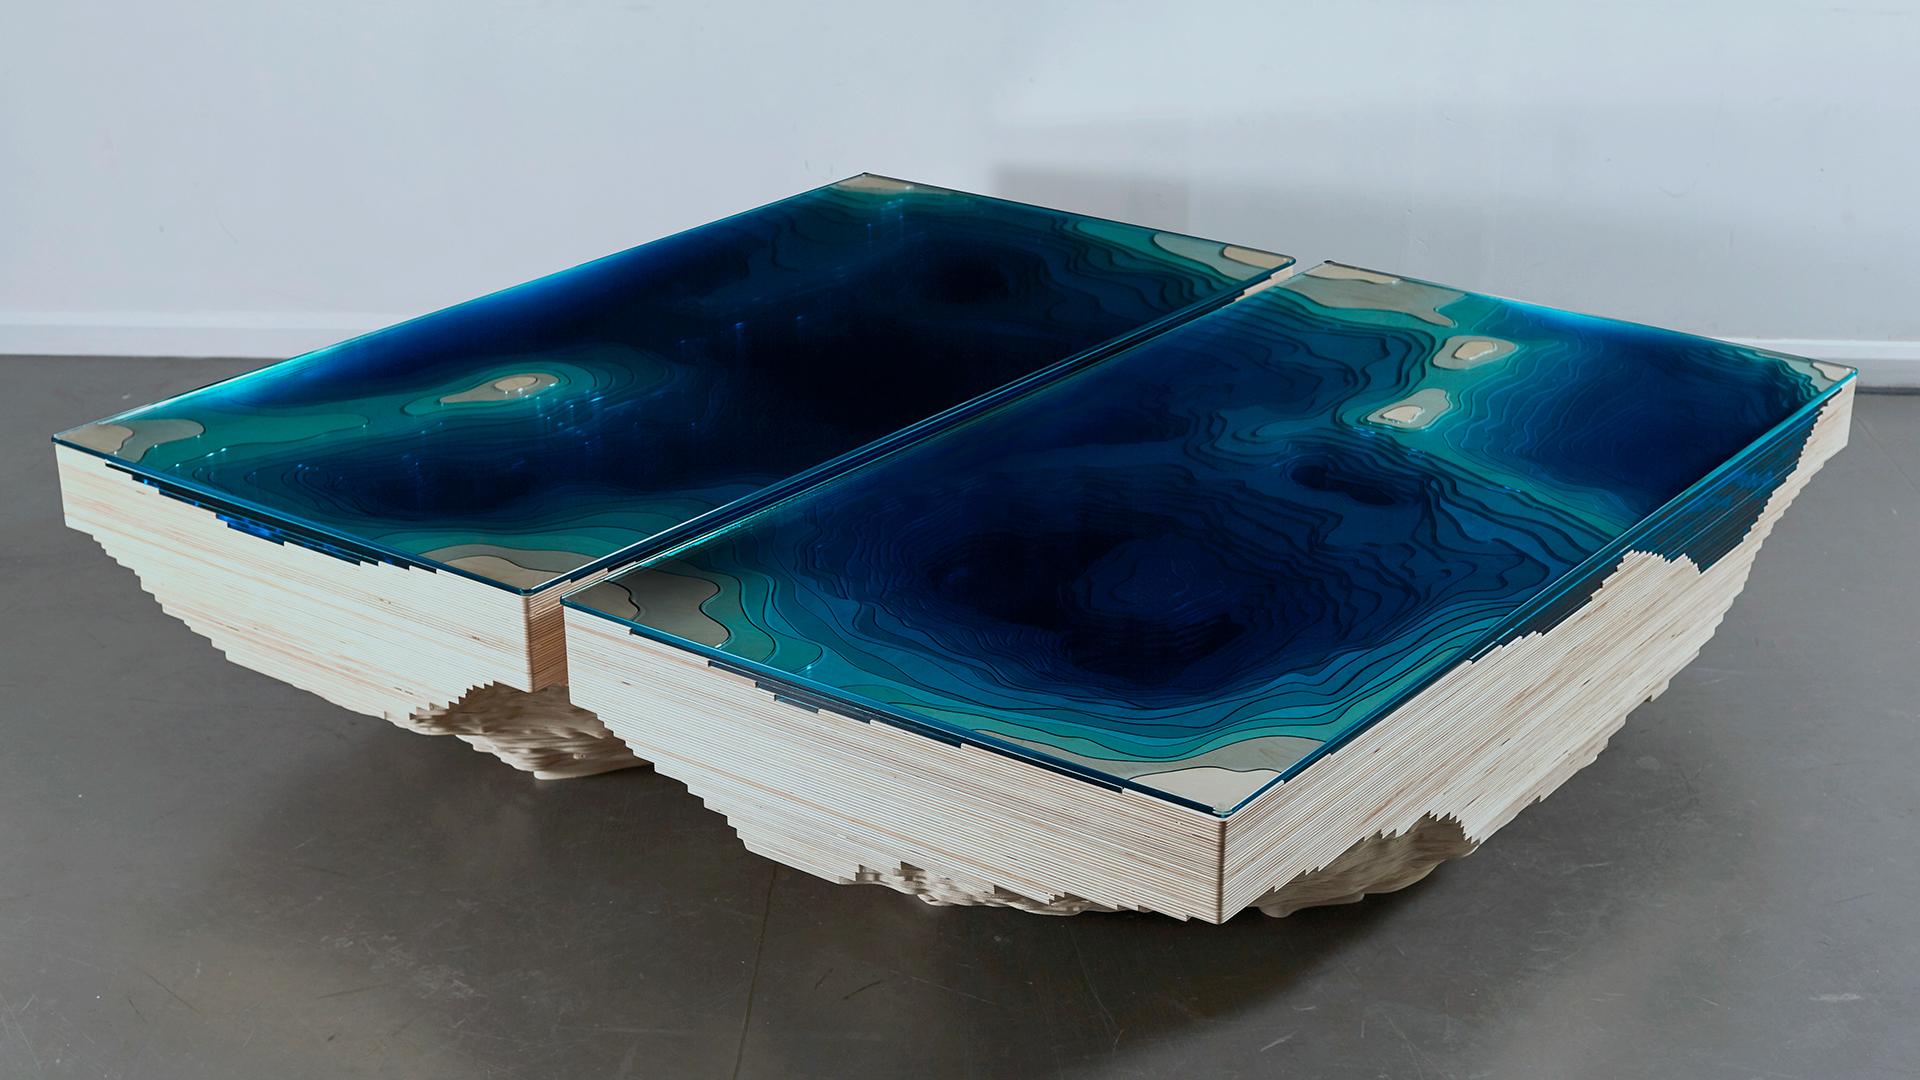 Abyss Kraken is a dramatic new statement coffee table by Christopher Duffy, played out over two pieces. 

Abyss Kraken continues Duffy’s explorations of the concept of depth with a mesmerising depiction of the Earth’s seabed, played out in a